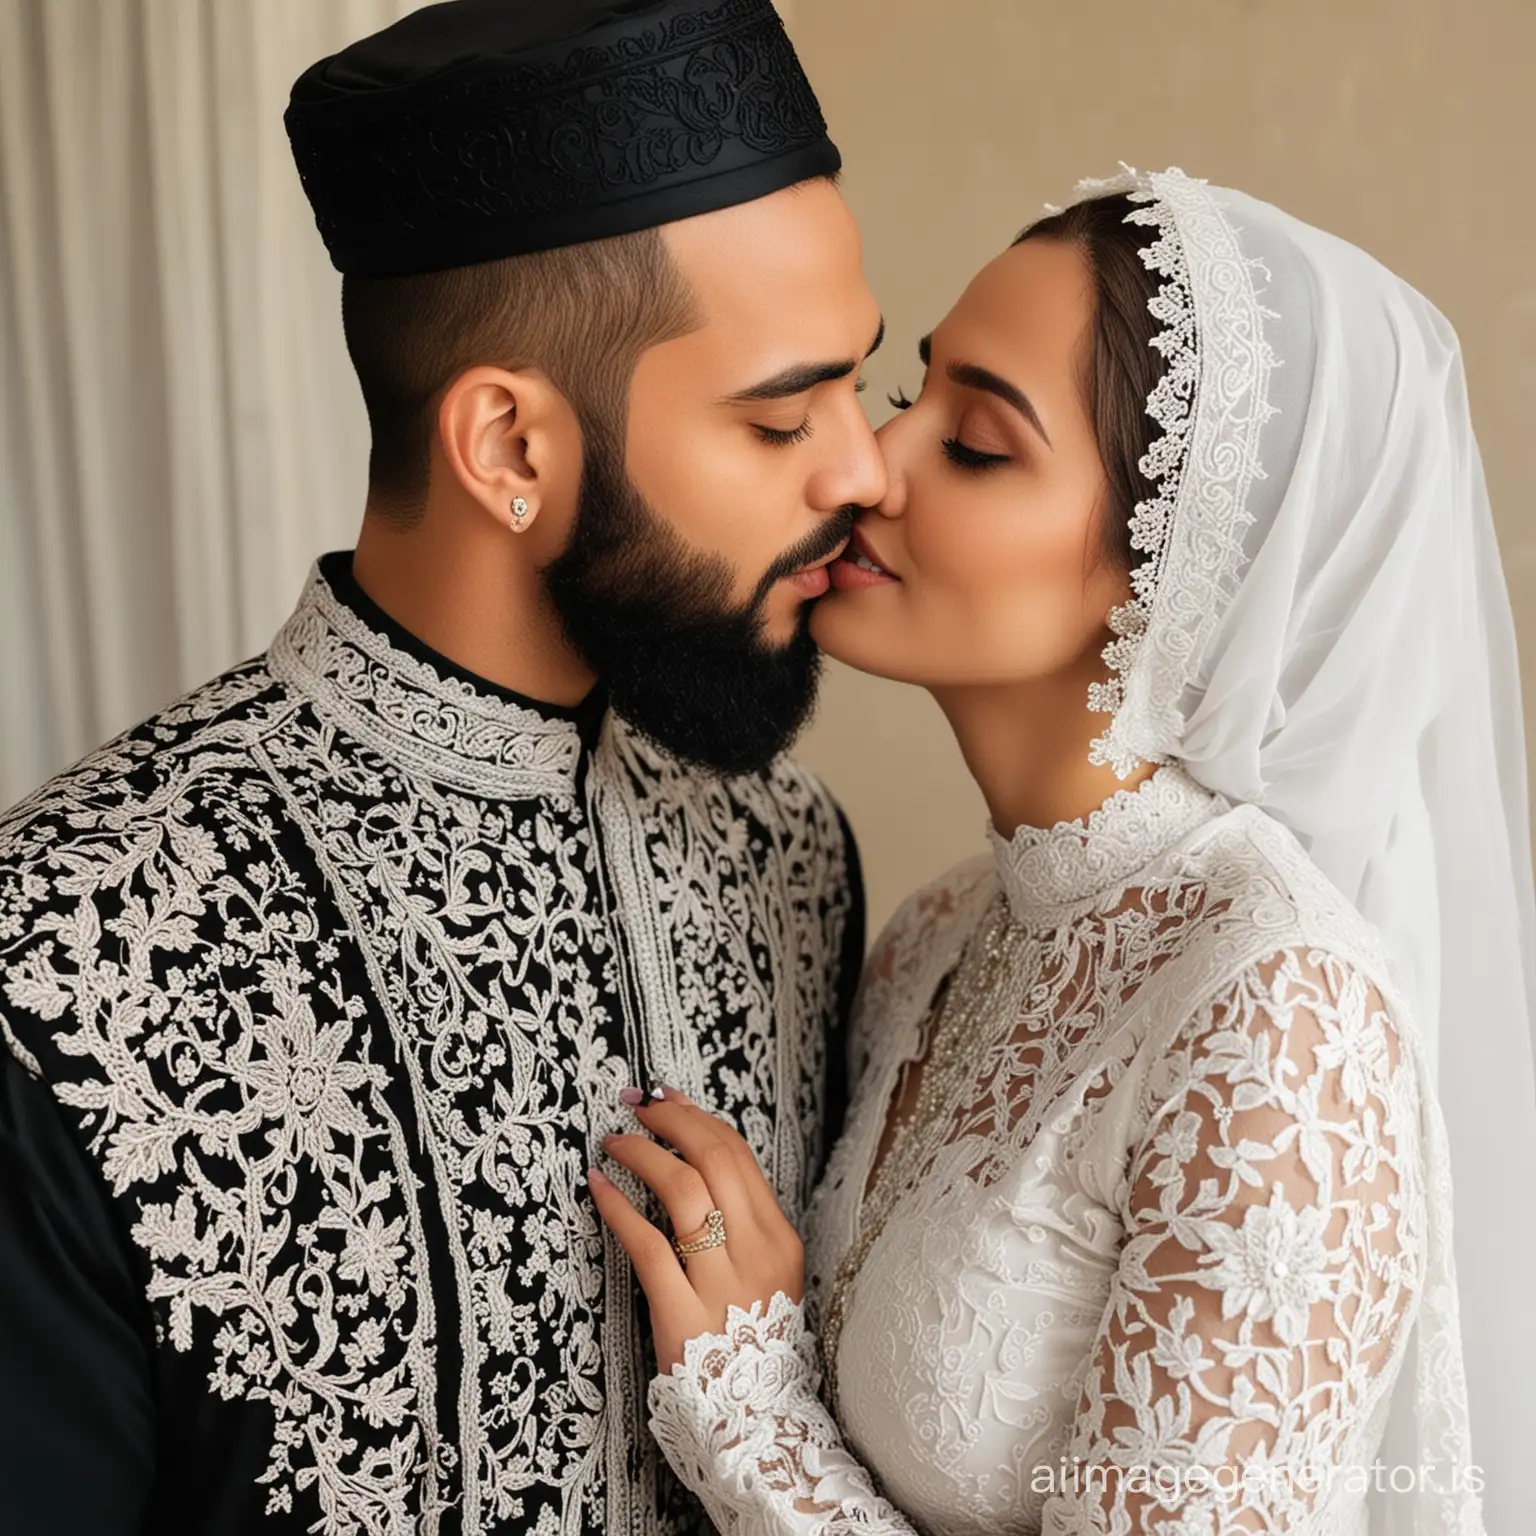 a Muslim woman with a beautiful face wearing a hijab, wearing a loose black floor-length Muslim dress with white lace ornaments and kissing a 35 year old man with a neat beard and buzz cut hair who seems to be her new husband.